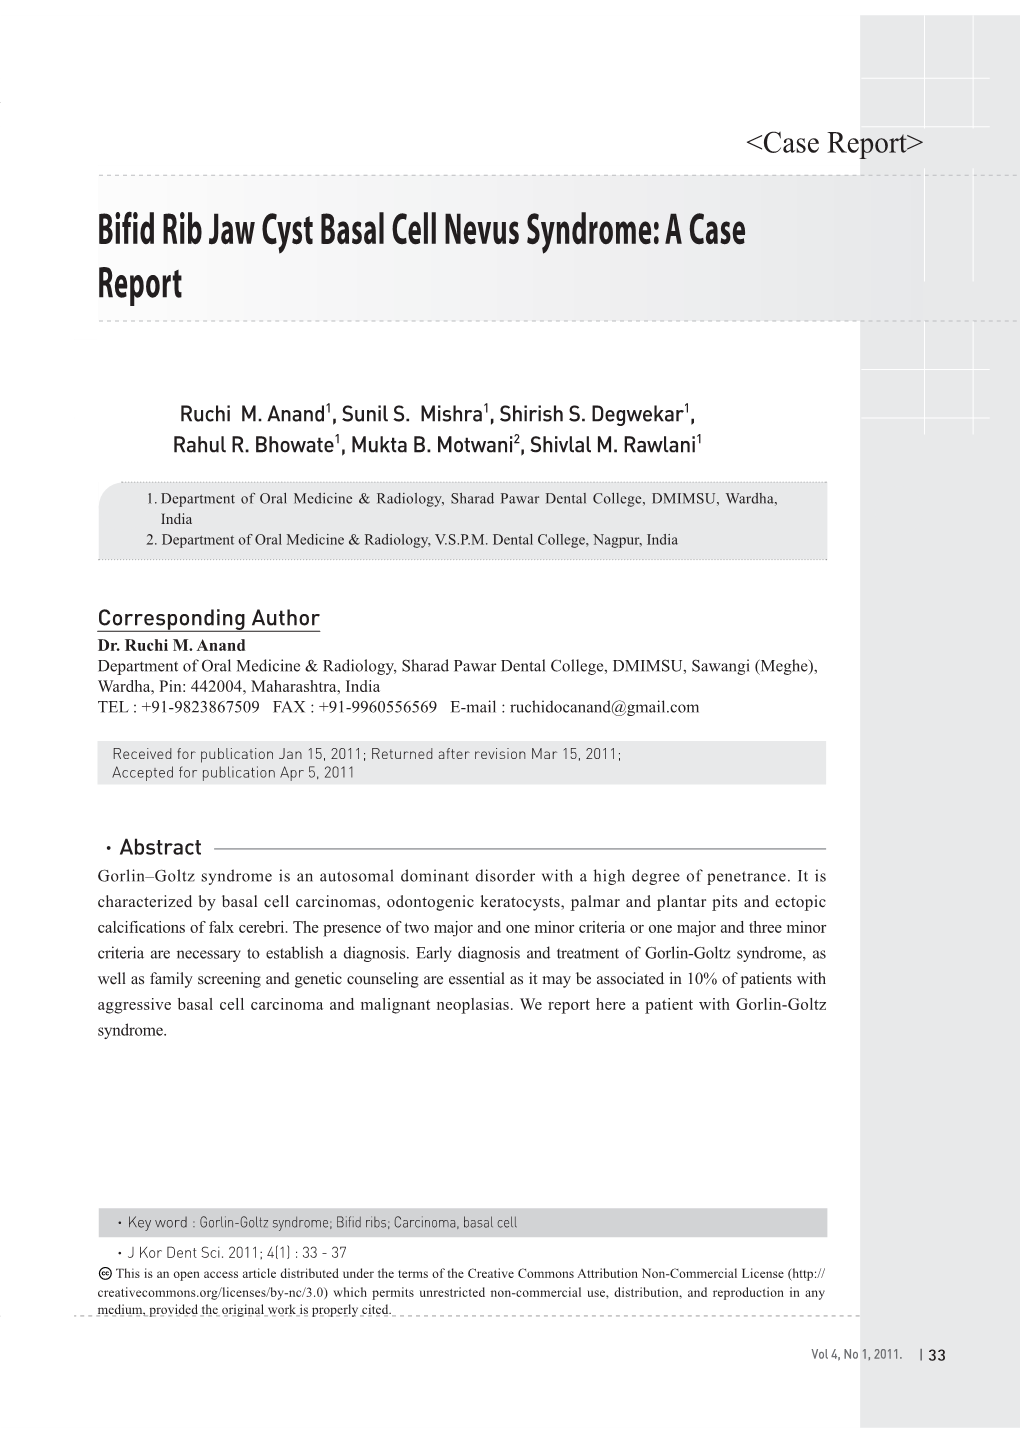 Bifid Rib Jaw Cyst Basal Cell Nevus Syndrome: a Case Report 33 33